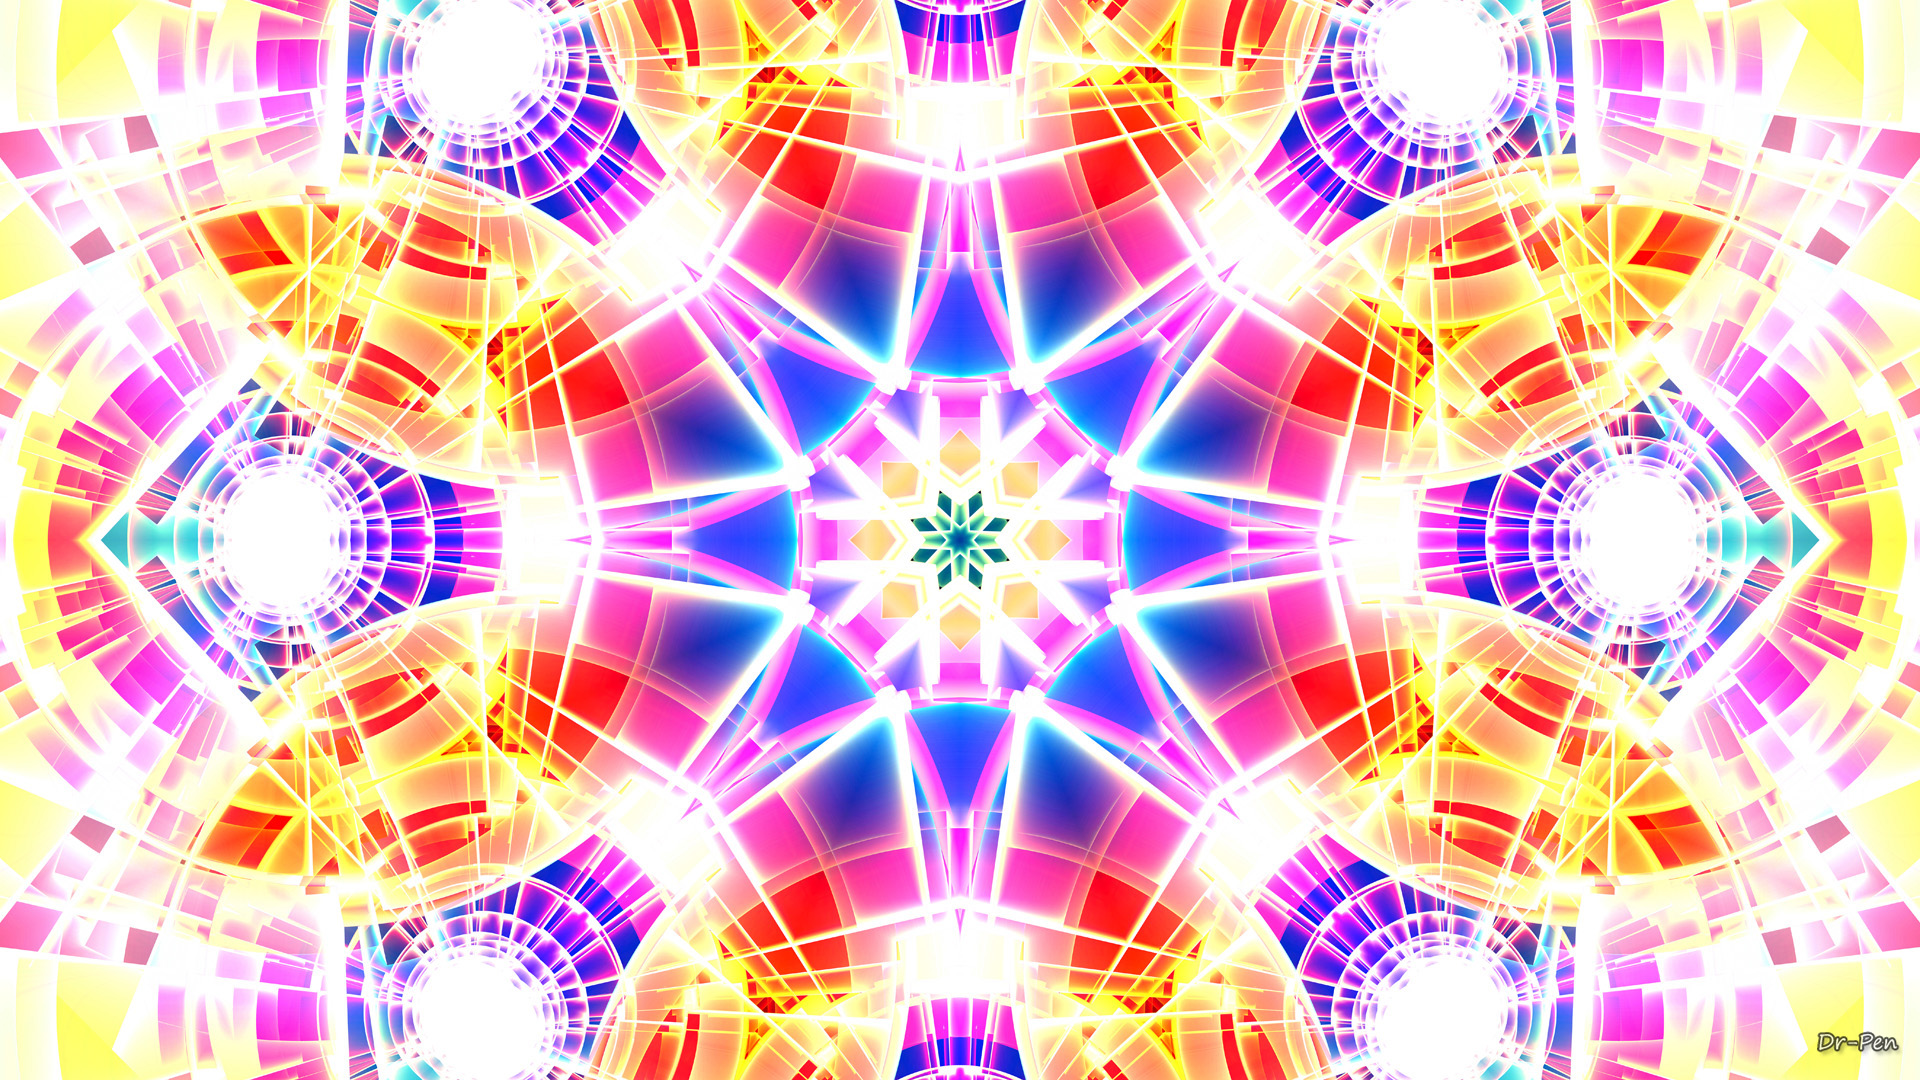 blue, purple, bright, abstract, pattern, colorful, colors, mandala, manipulation, orange (color), rainbow, red, spectrum, yellow